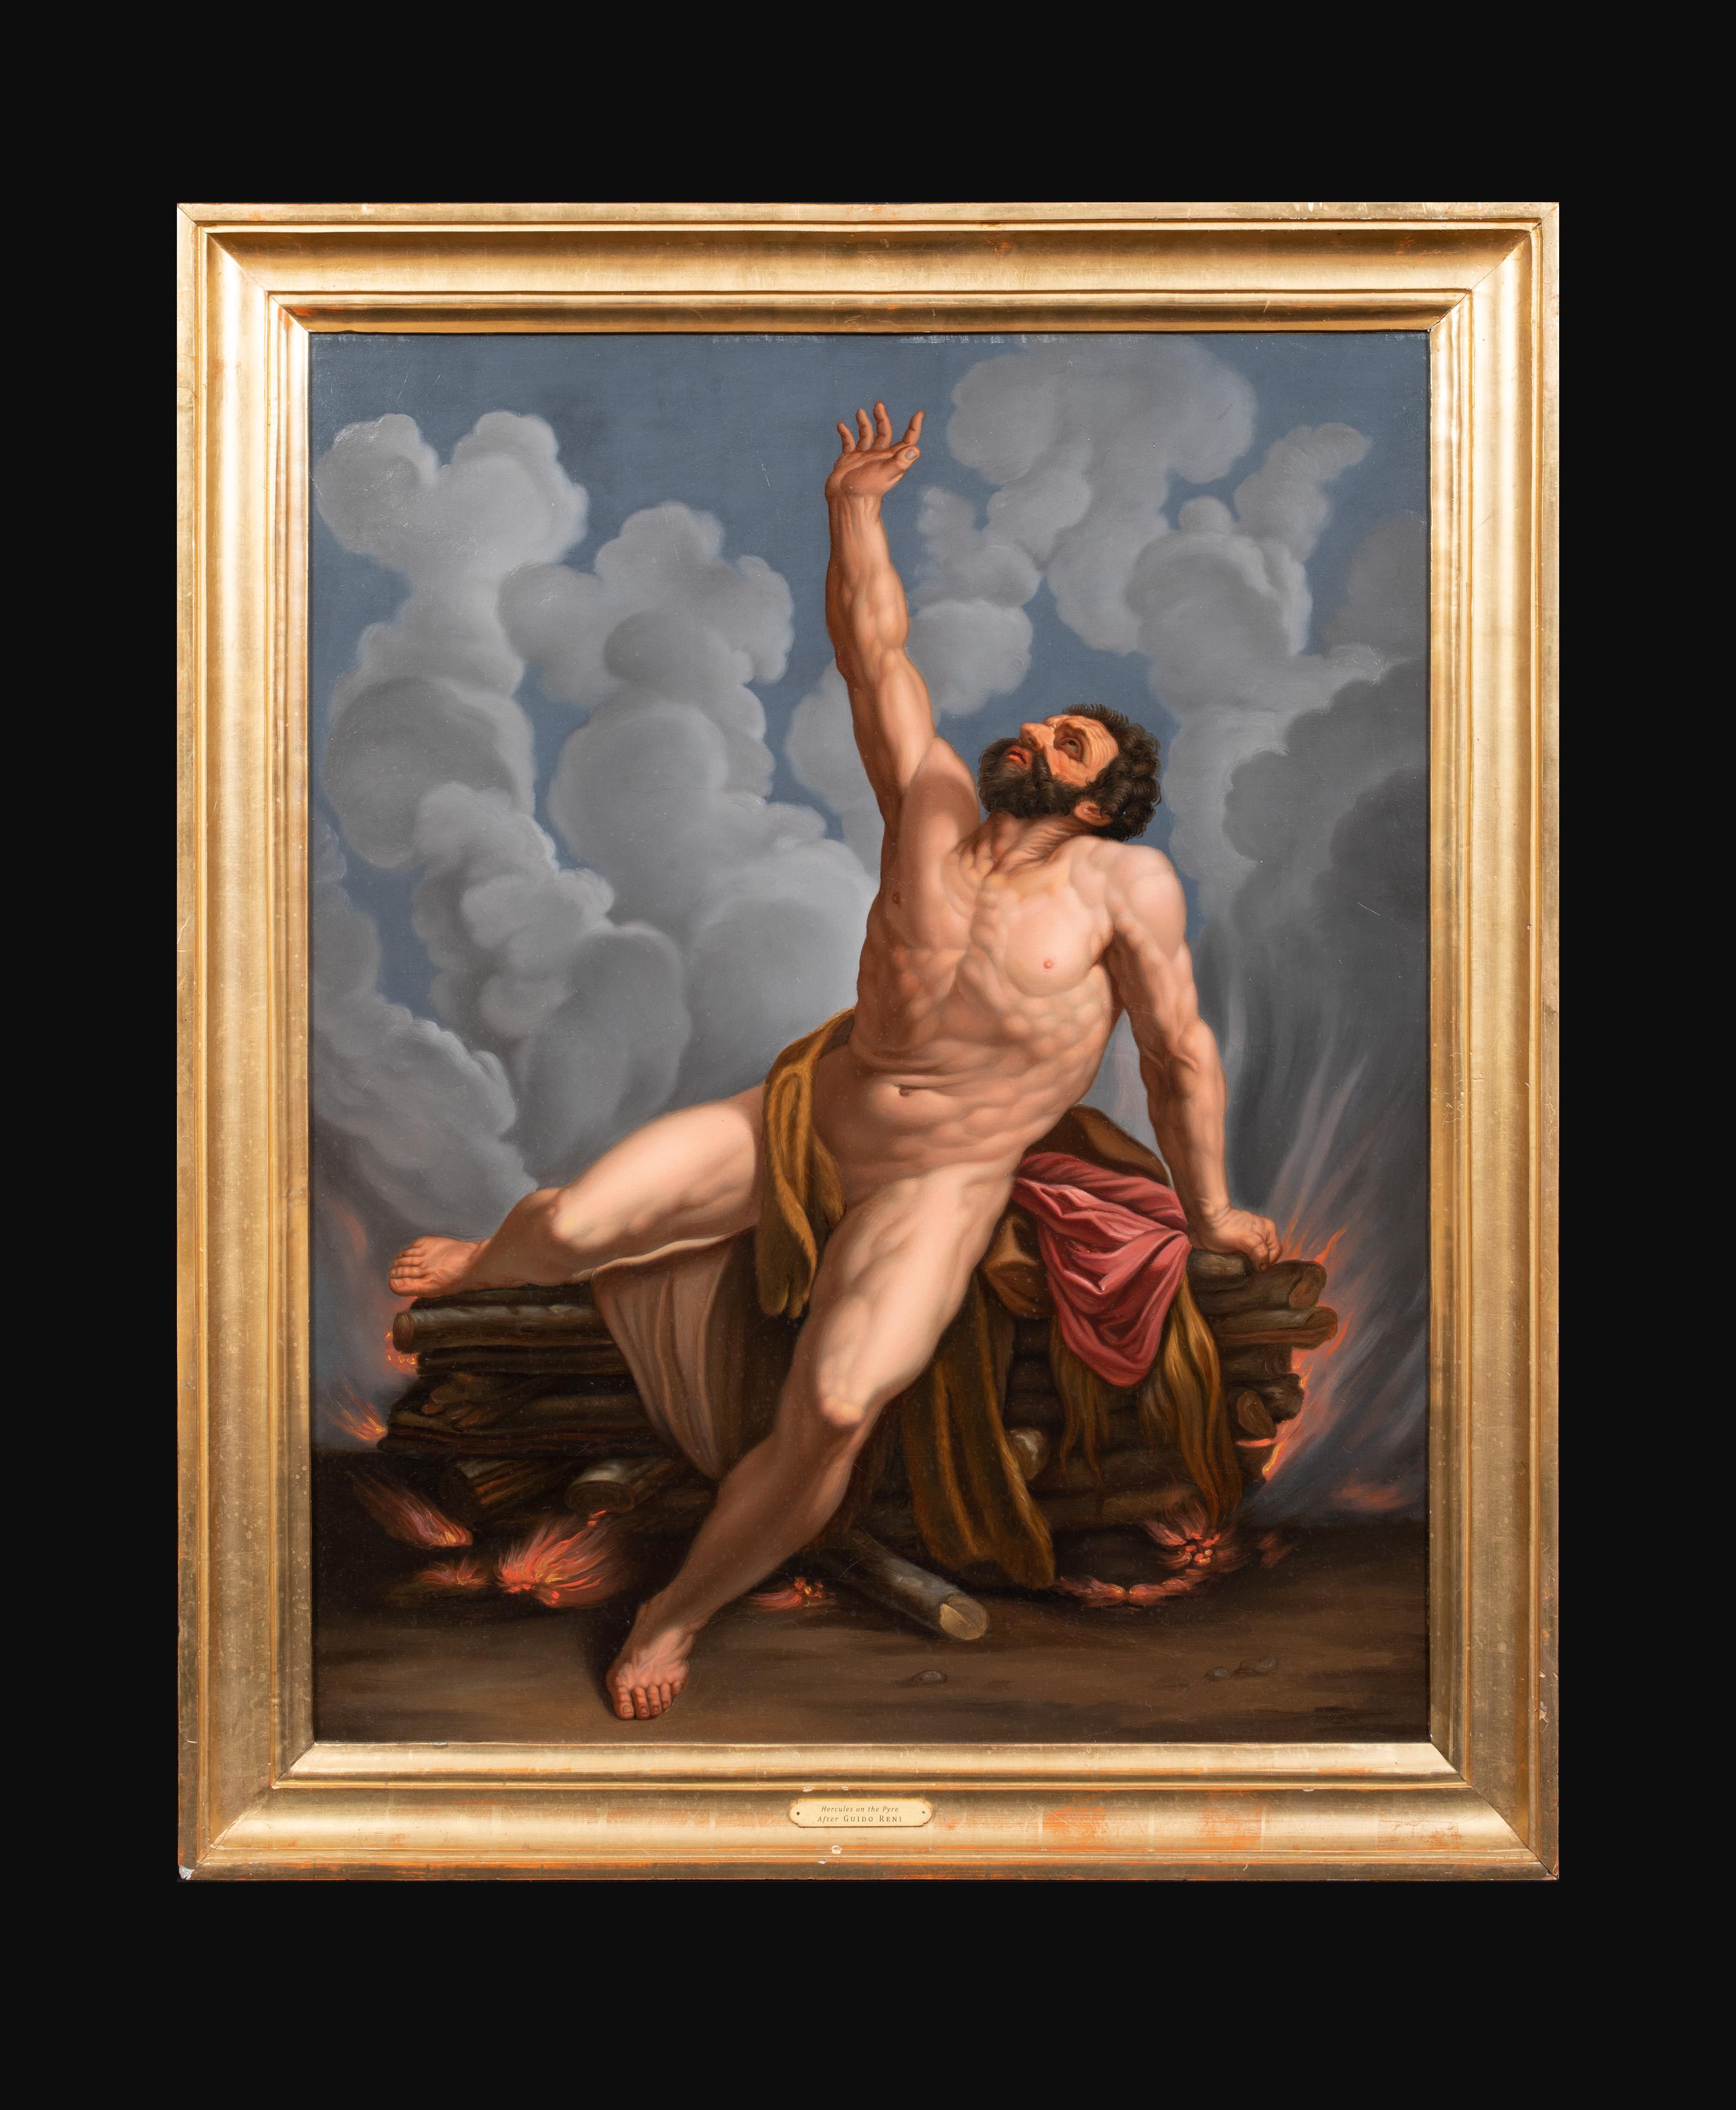 Hercules At The Funeral Pyre at Mount Oeta, 18th Century - Painting by Guido Reni